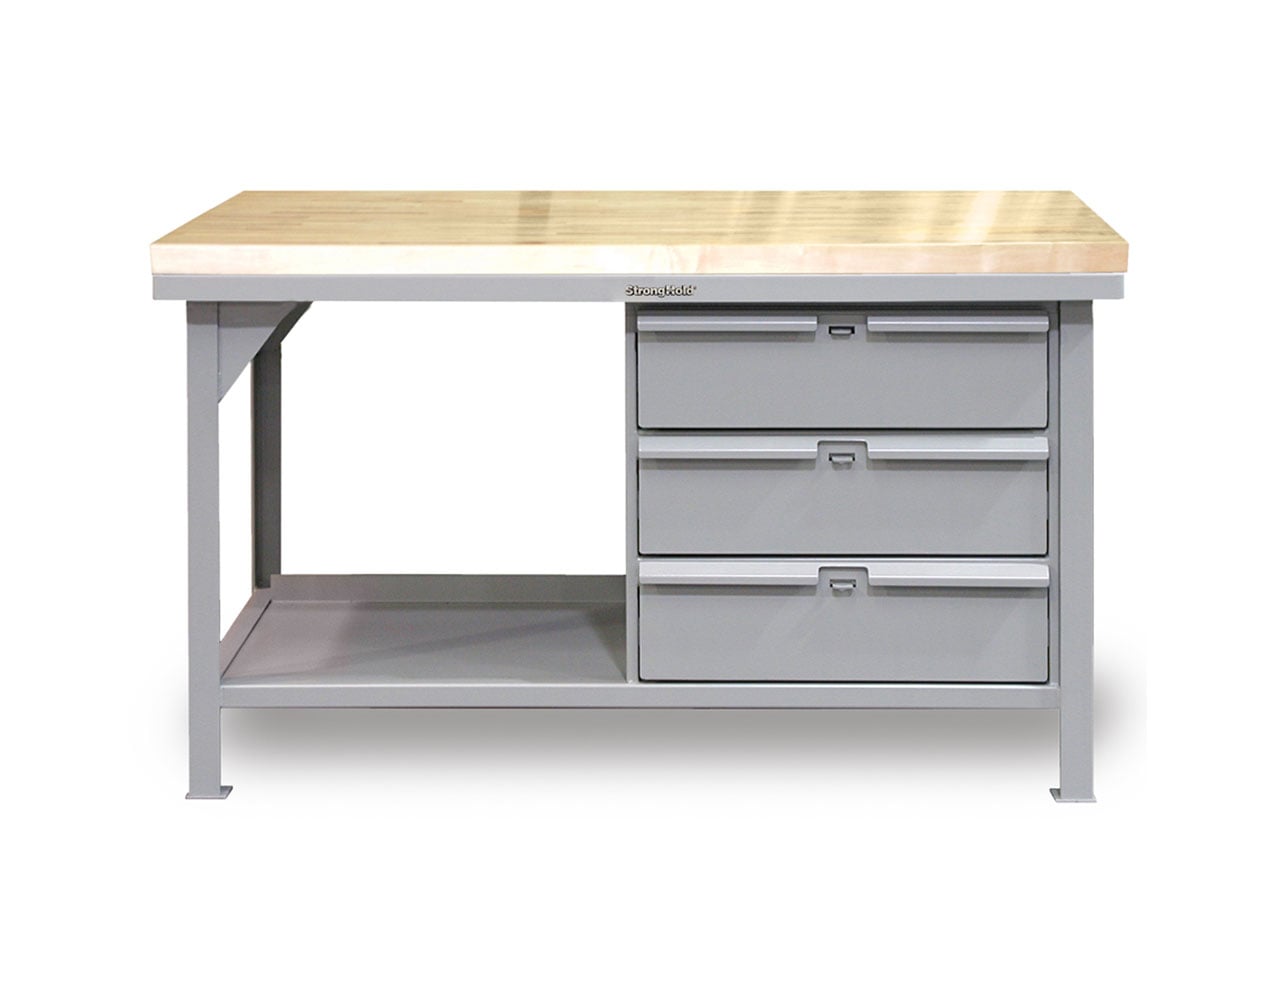 Extreme Duty 7 GA Shop Table with 1 3/4 in. Maple Top, 3 Drawers, 1 Shelf - 60 In. W x 36 In. D x 34 In. H